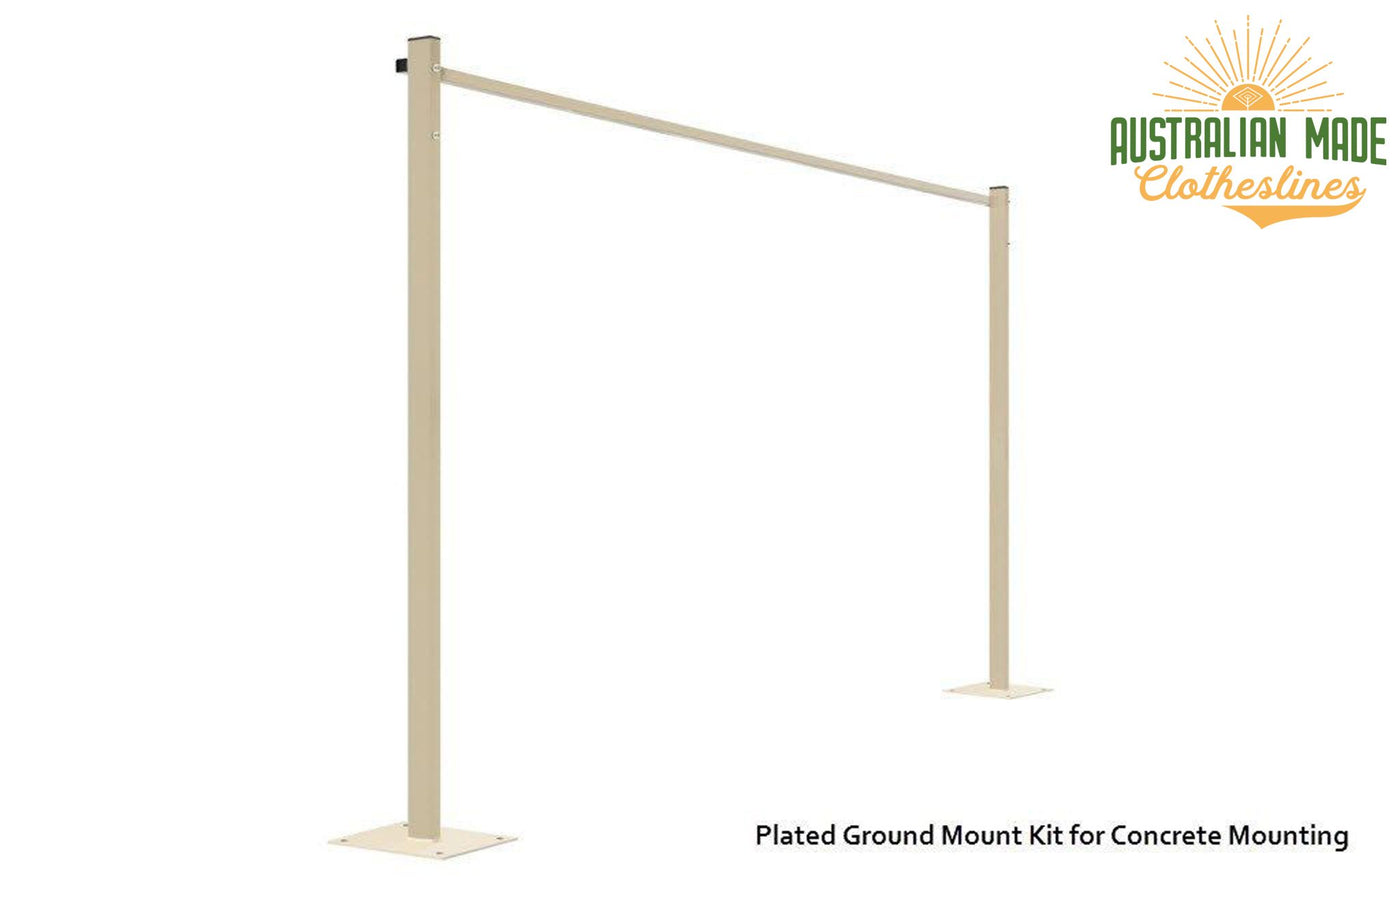 Austral 3.3m Ground Mount Kit - Classic Cream Plated Ground Mount Kit for Concrete Mounting - Australian Made Clotheslines